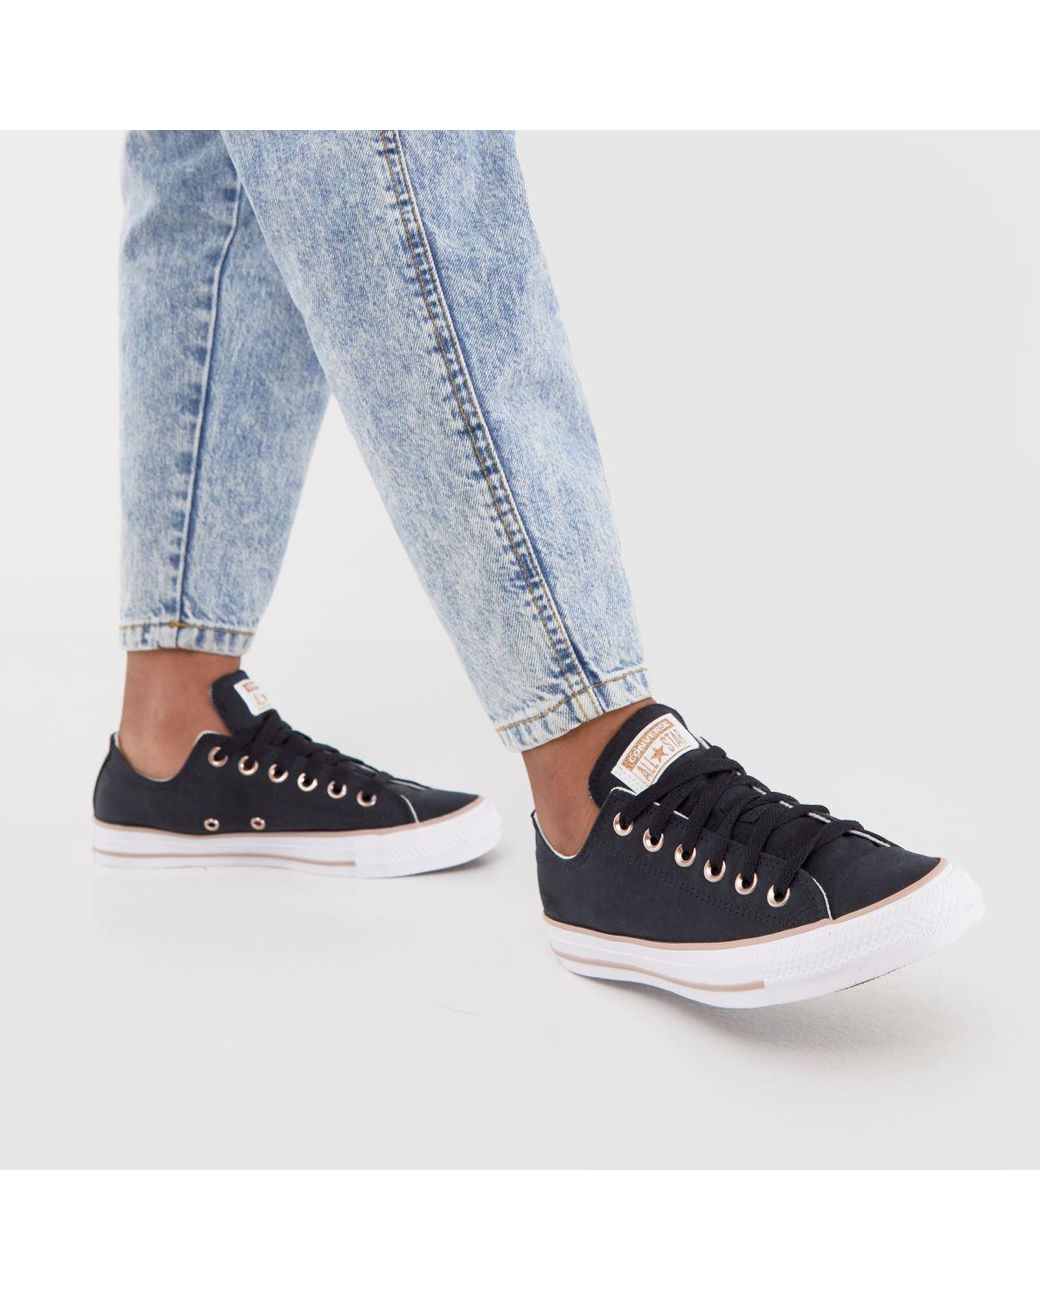 Converse All Star Peached Canvas Ox Trainers in Black | Lyst UK